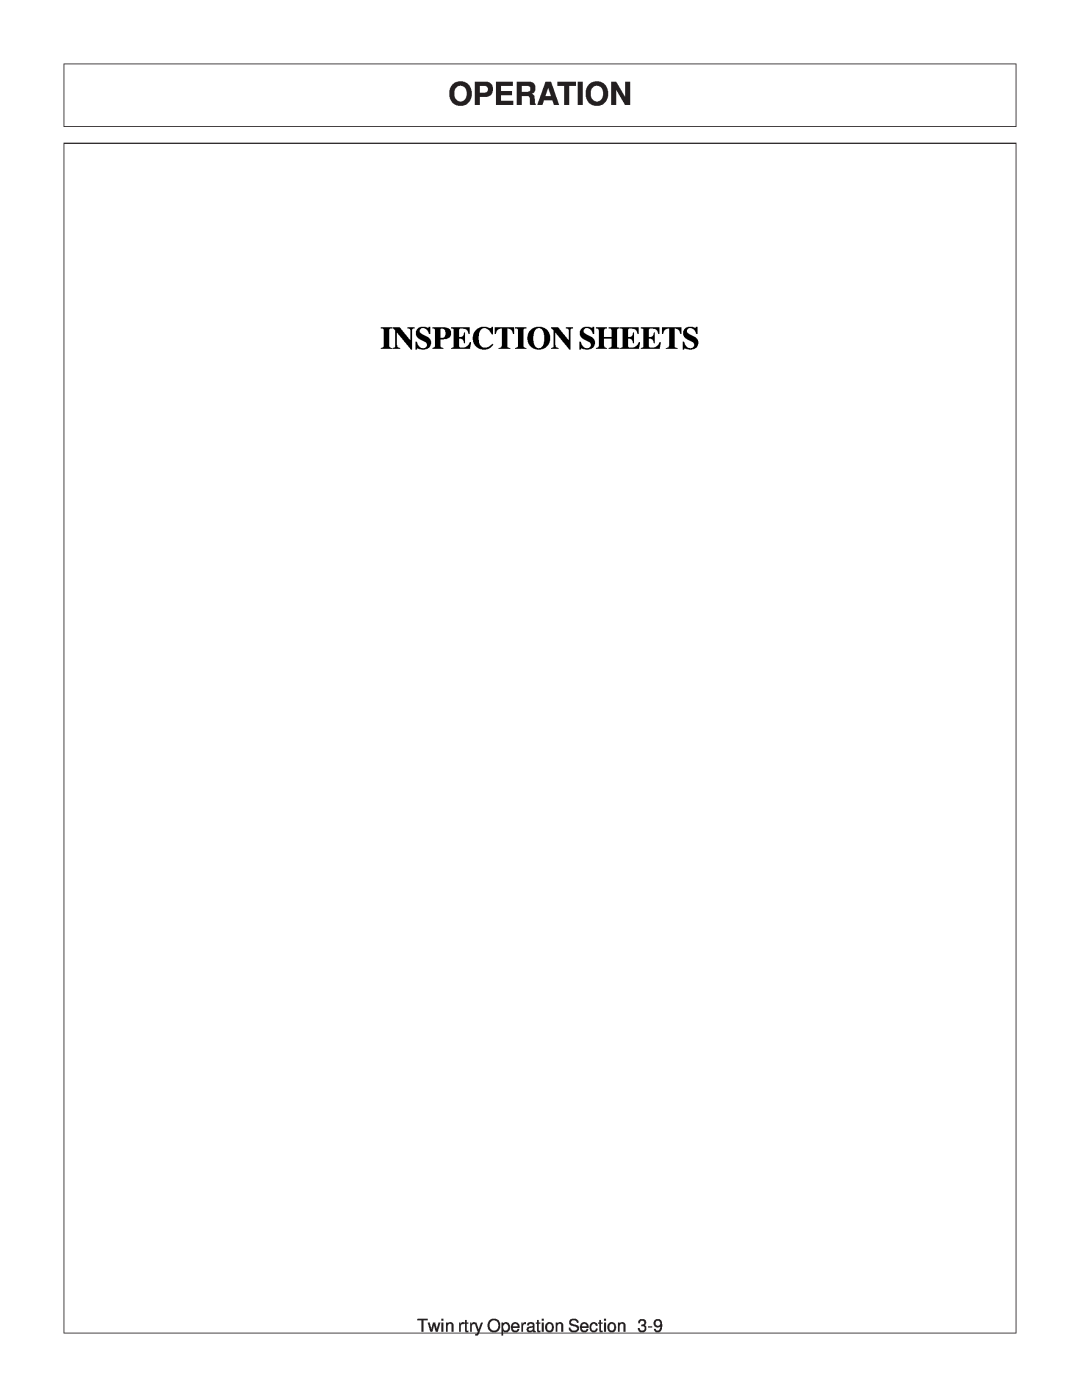 Tiger Products Co., Ltd 6020009 manual Inspection Sheets, Operation 